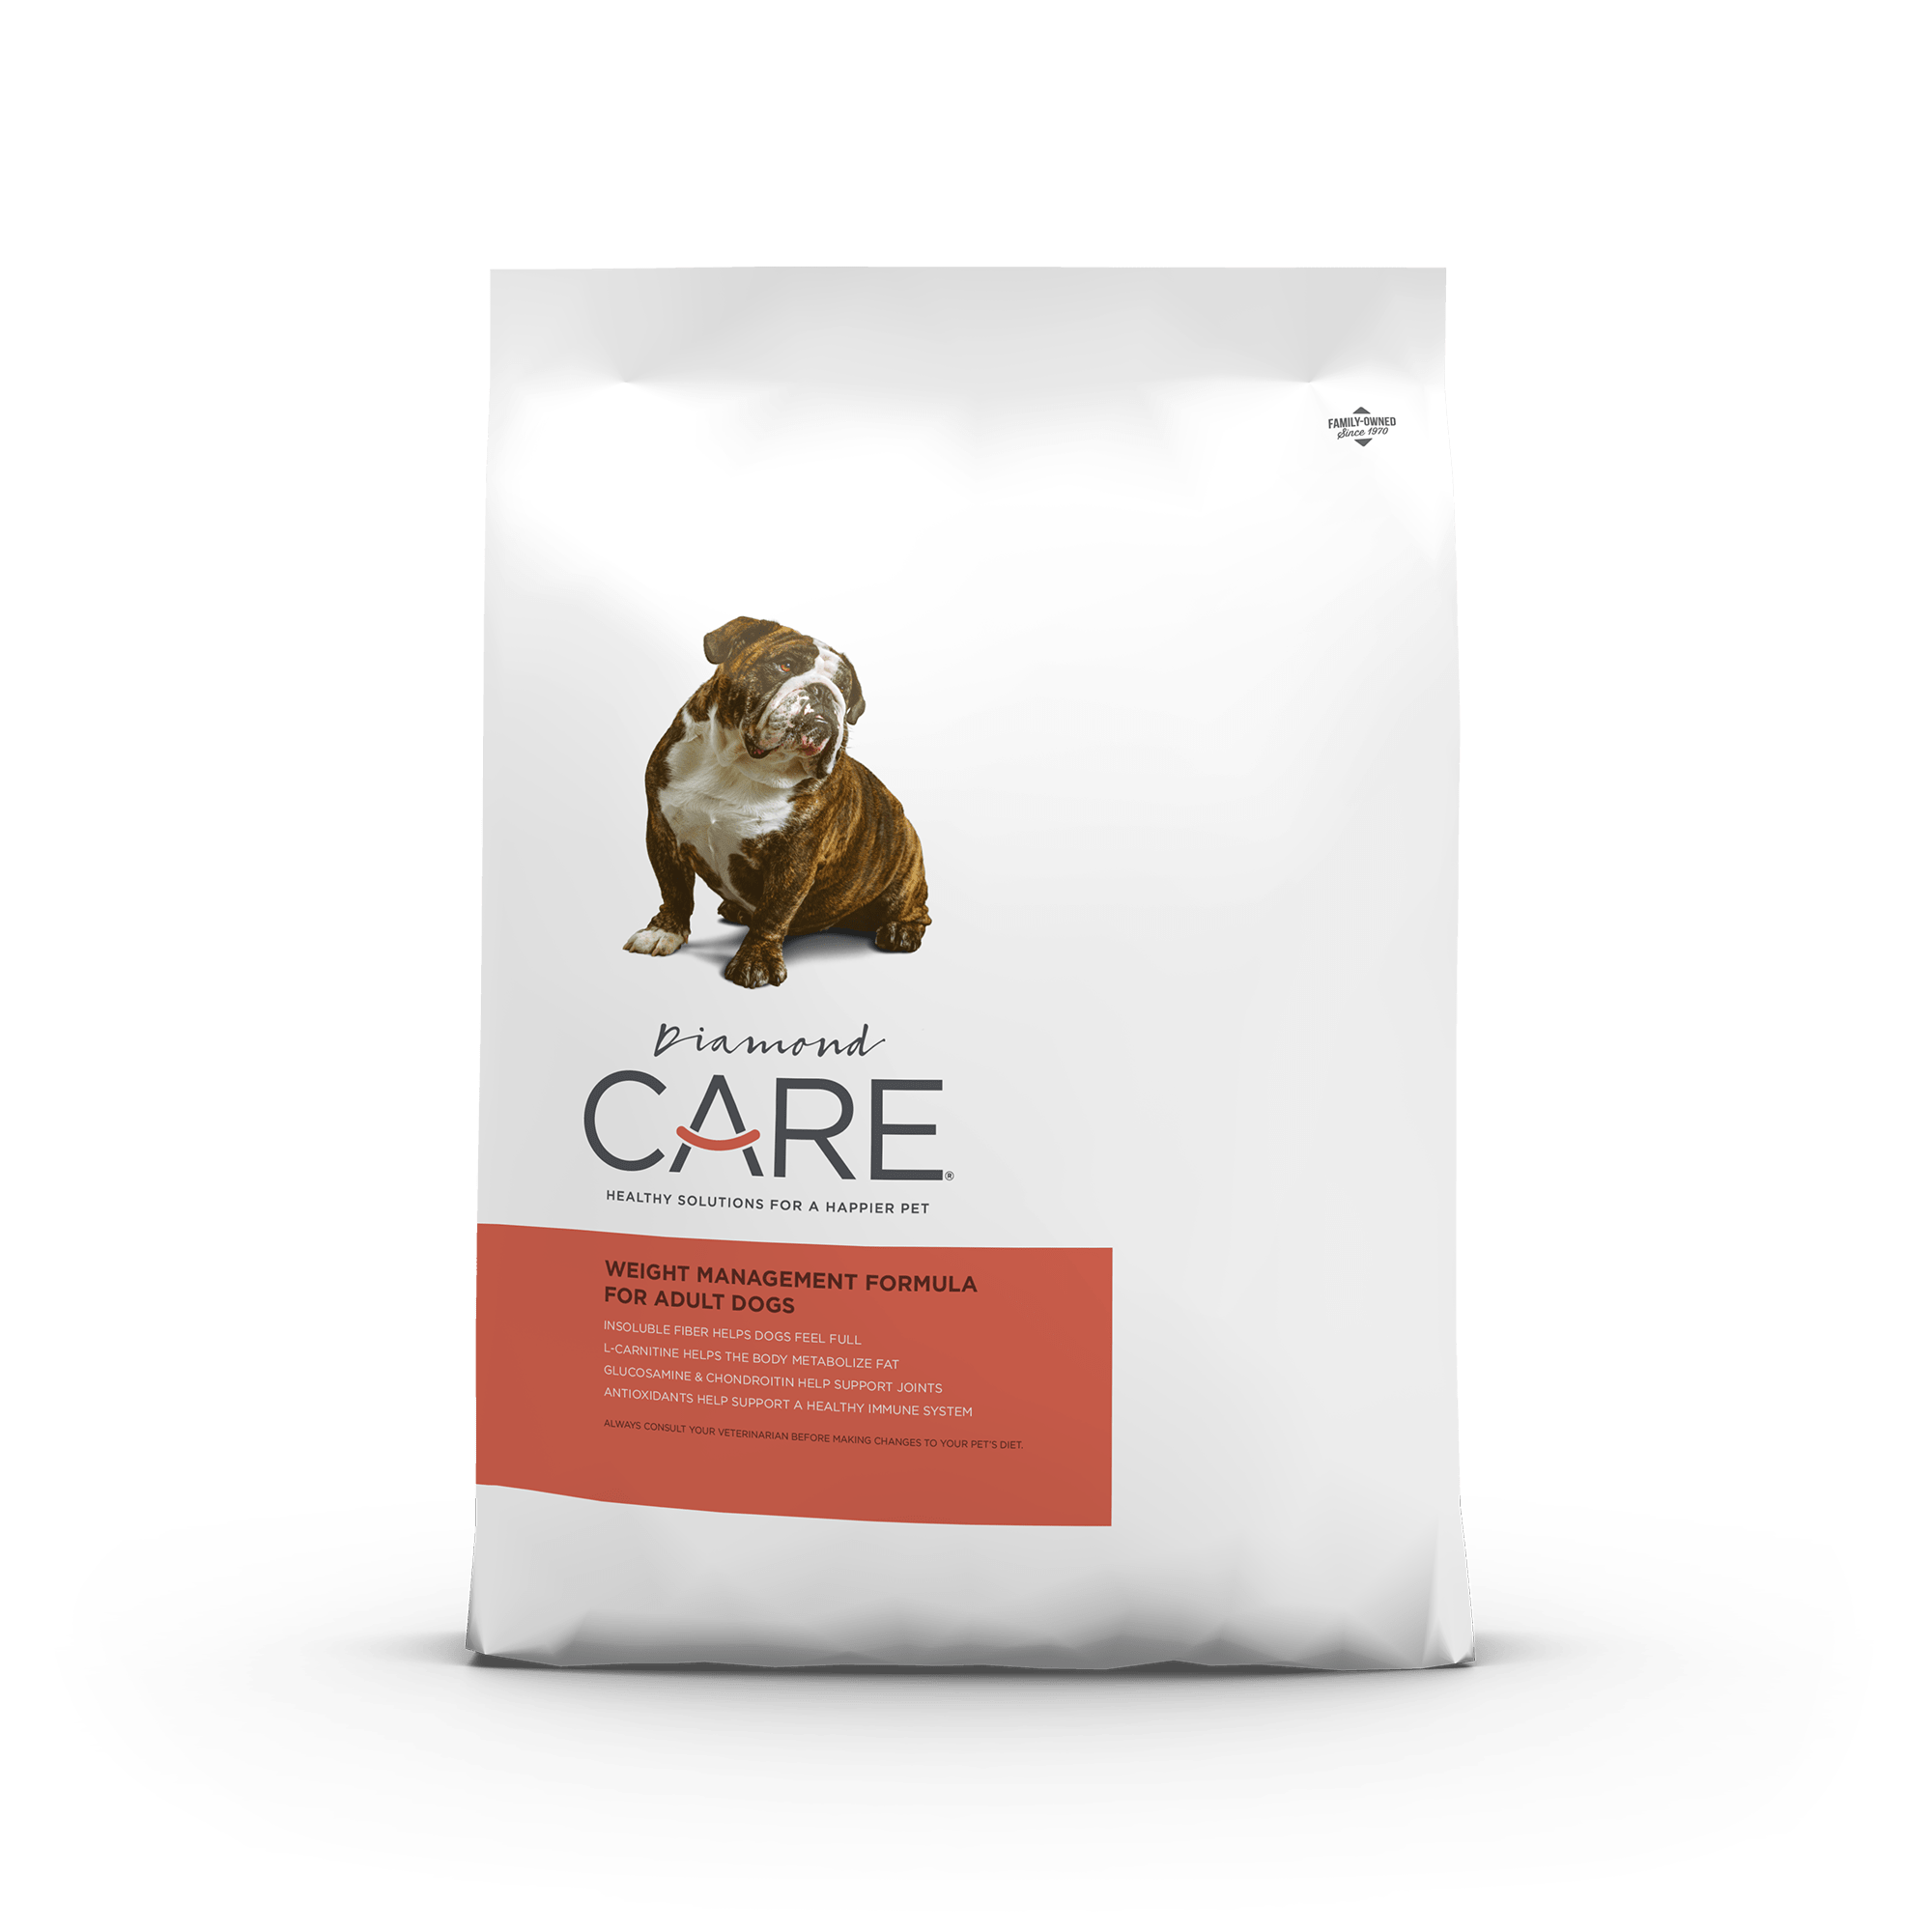 Diamond CARE Weight Management Formula for Adult Dogs product packaging